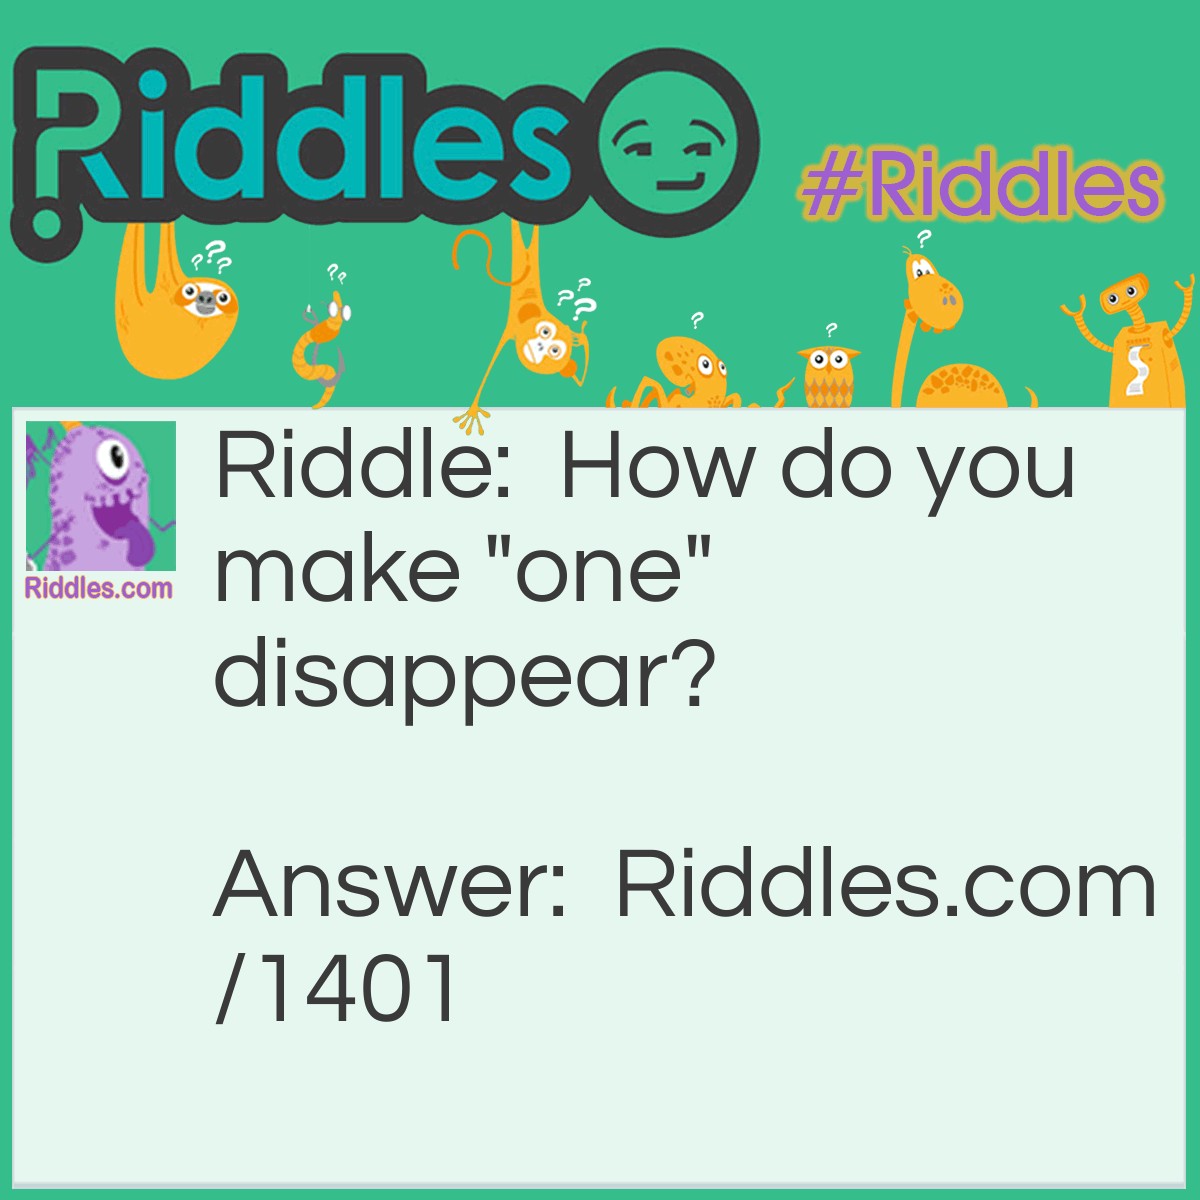 Riddle: How do you make "one" disappear? Answer: Add a G to it and it's gone.